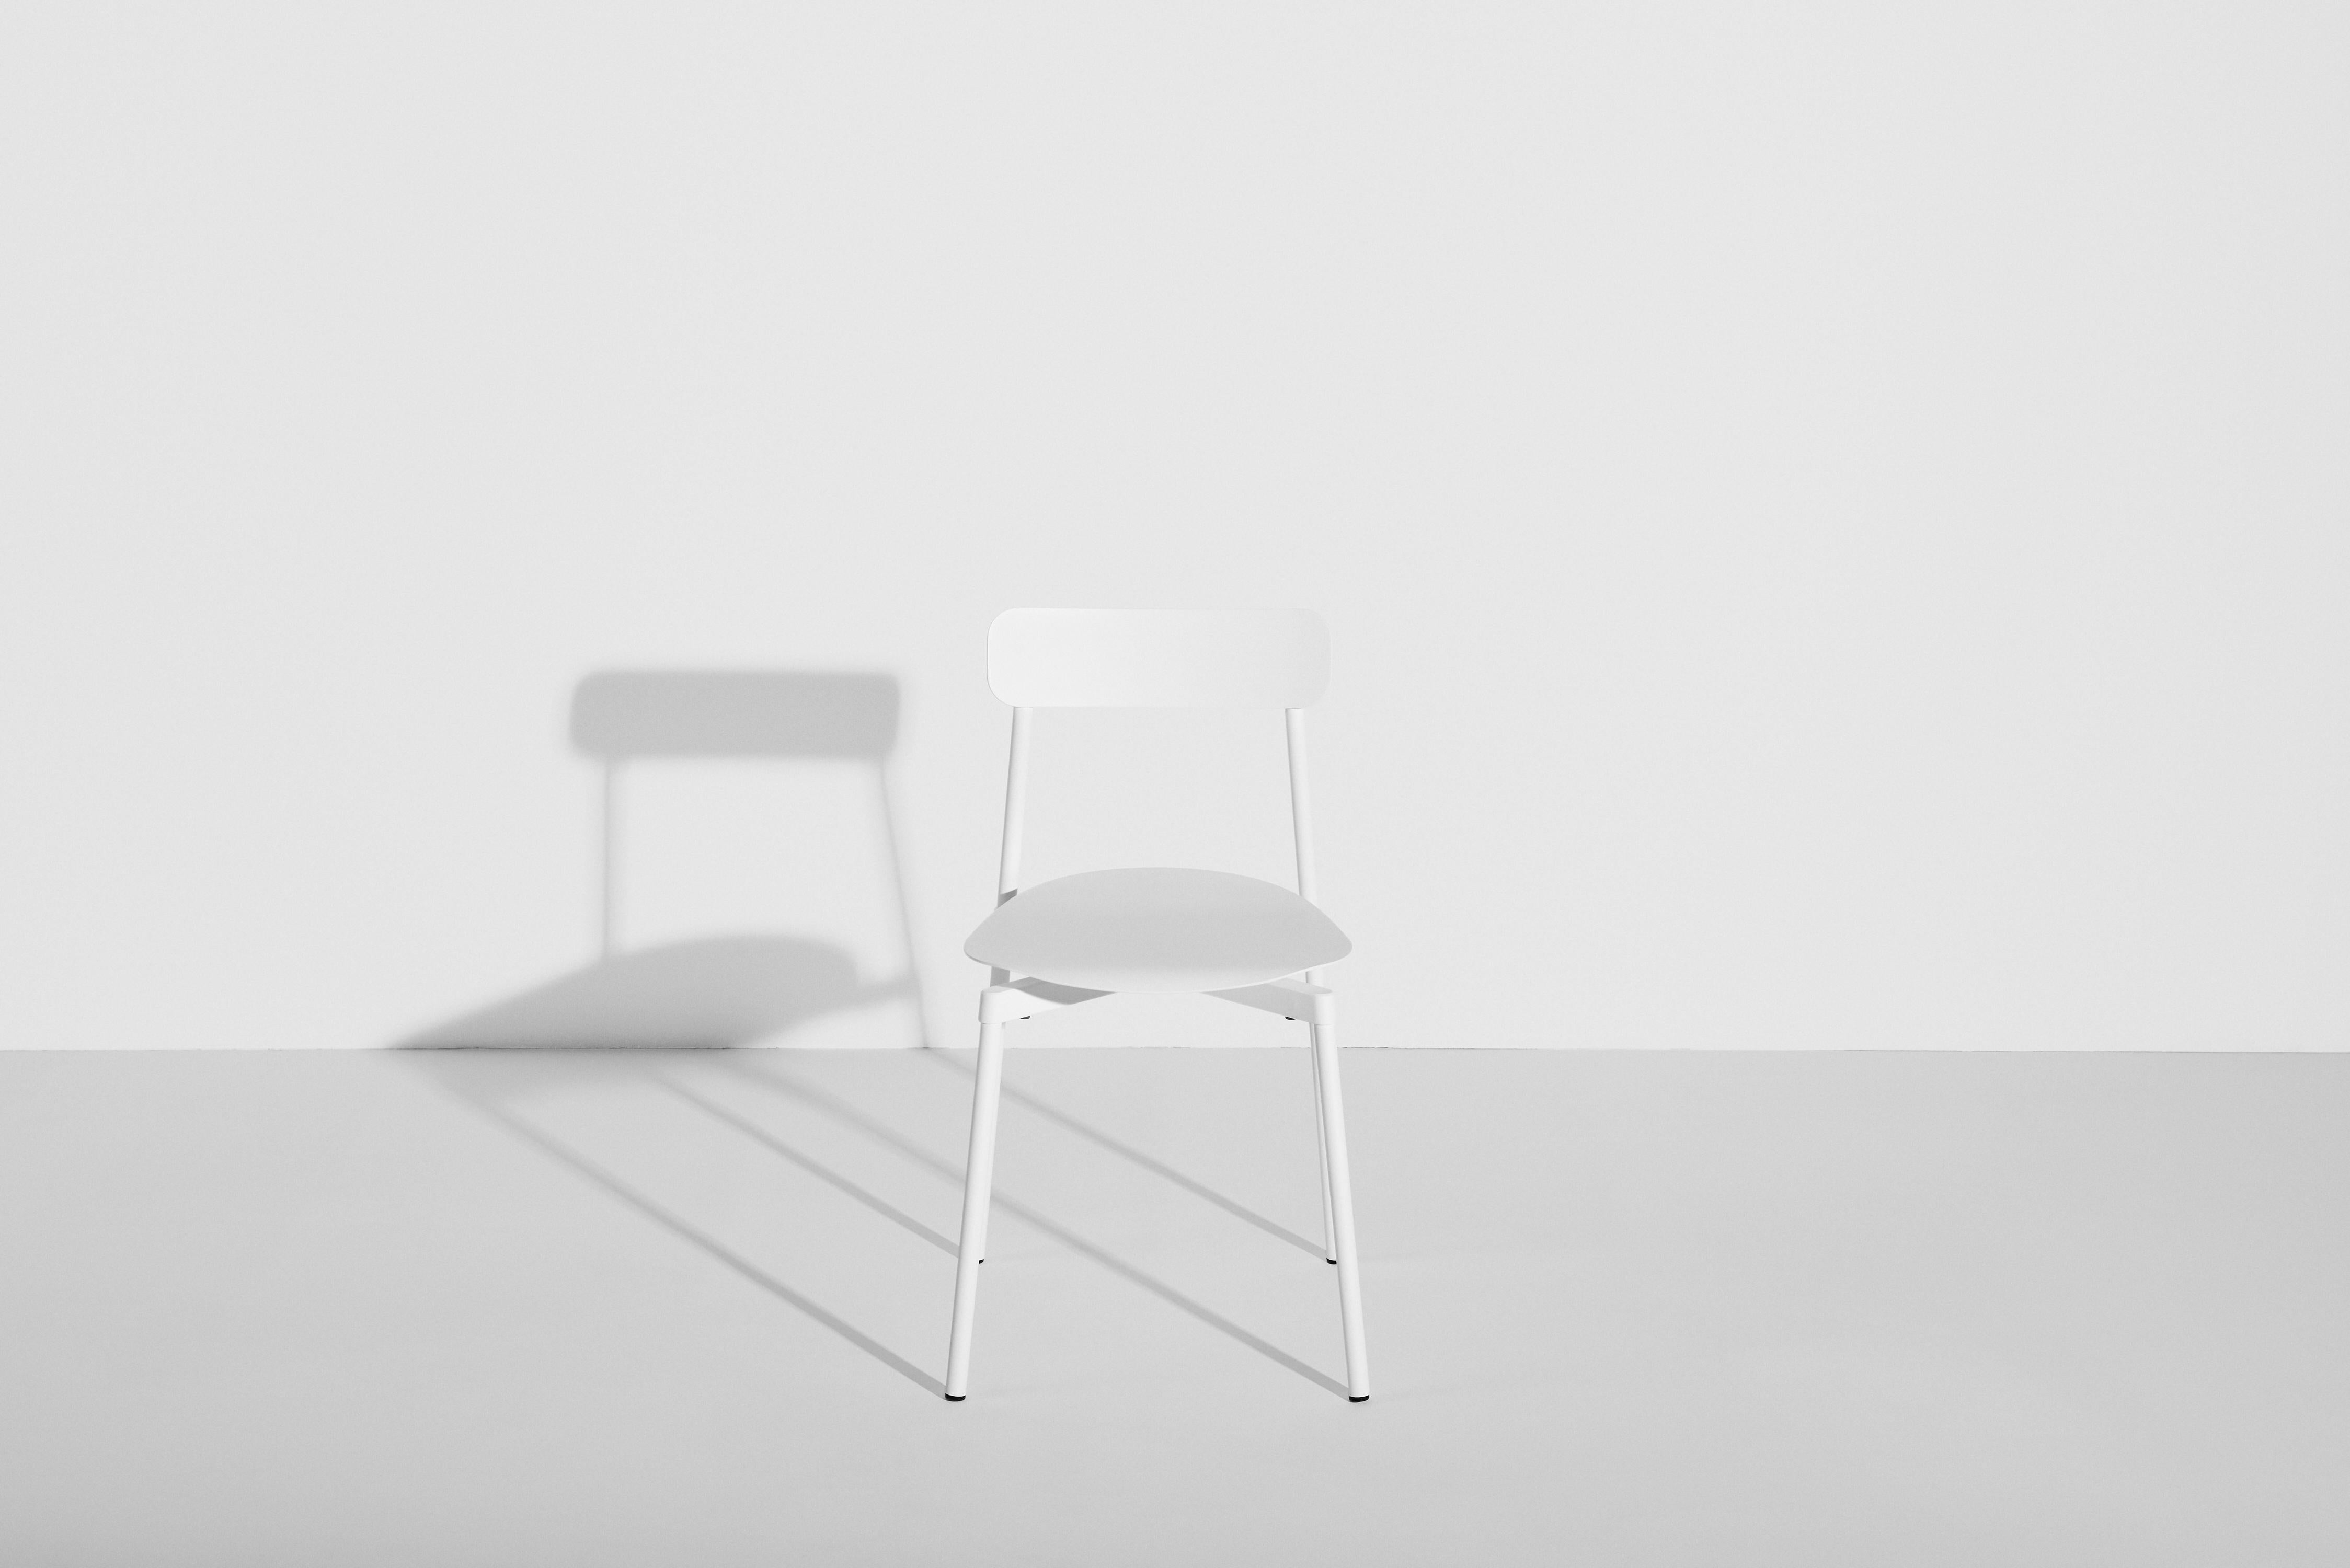 Petite Friture Fromme Chair in White Aluminium by Tom Chung, 2019

The Fromme chair stands out by its pure line and compact design. Absorbers placed under the seating gives a soft and very comfortable flexibility to the chair. Made from aluminium,